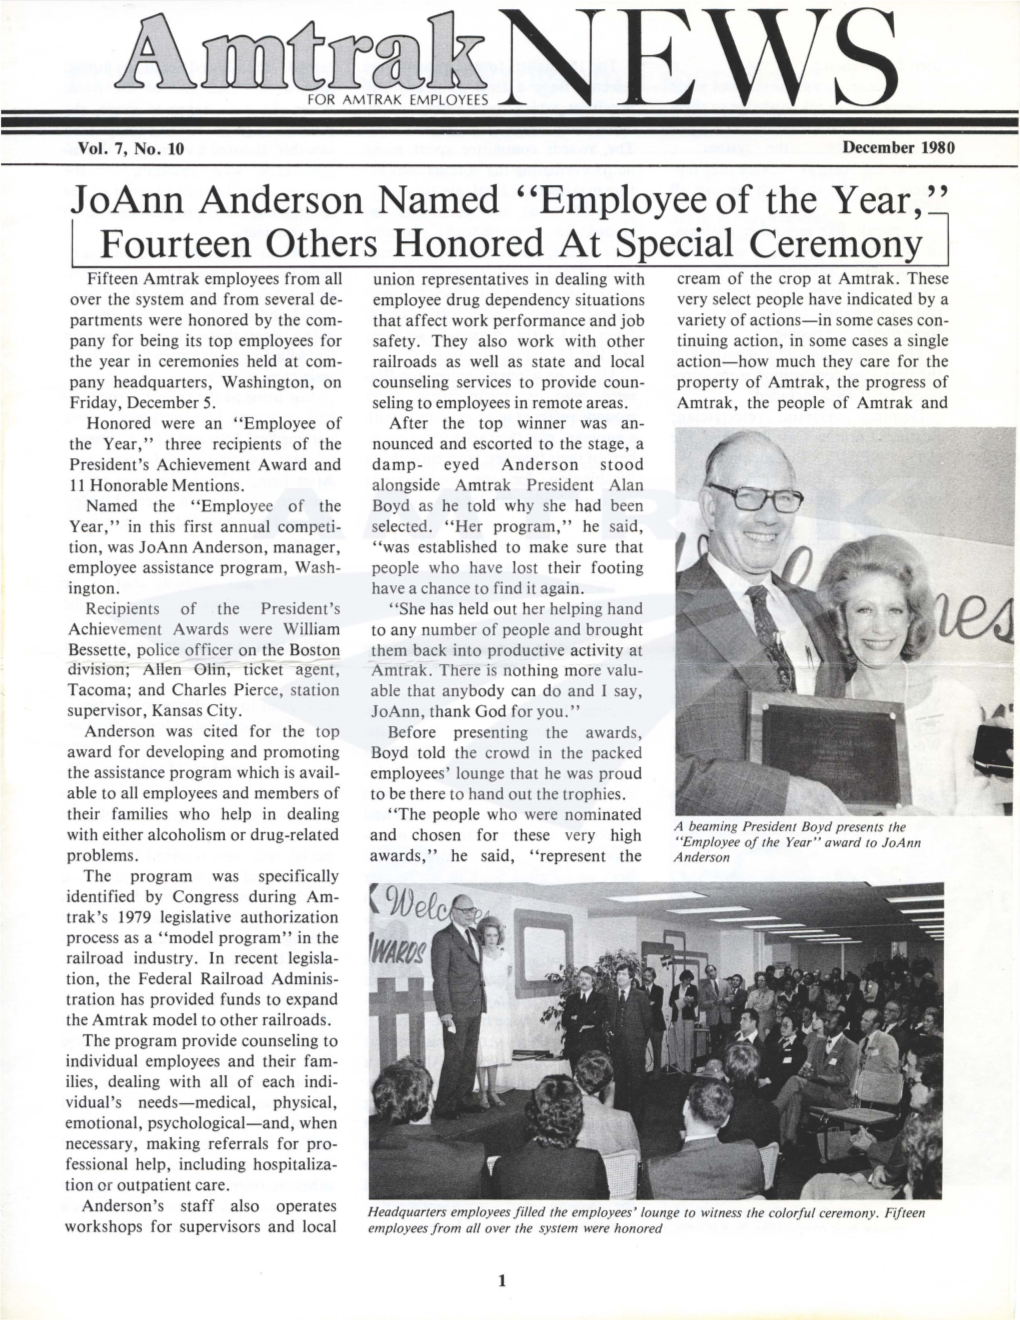 Joann Anderson Named "Employee of the Year," I